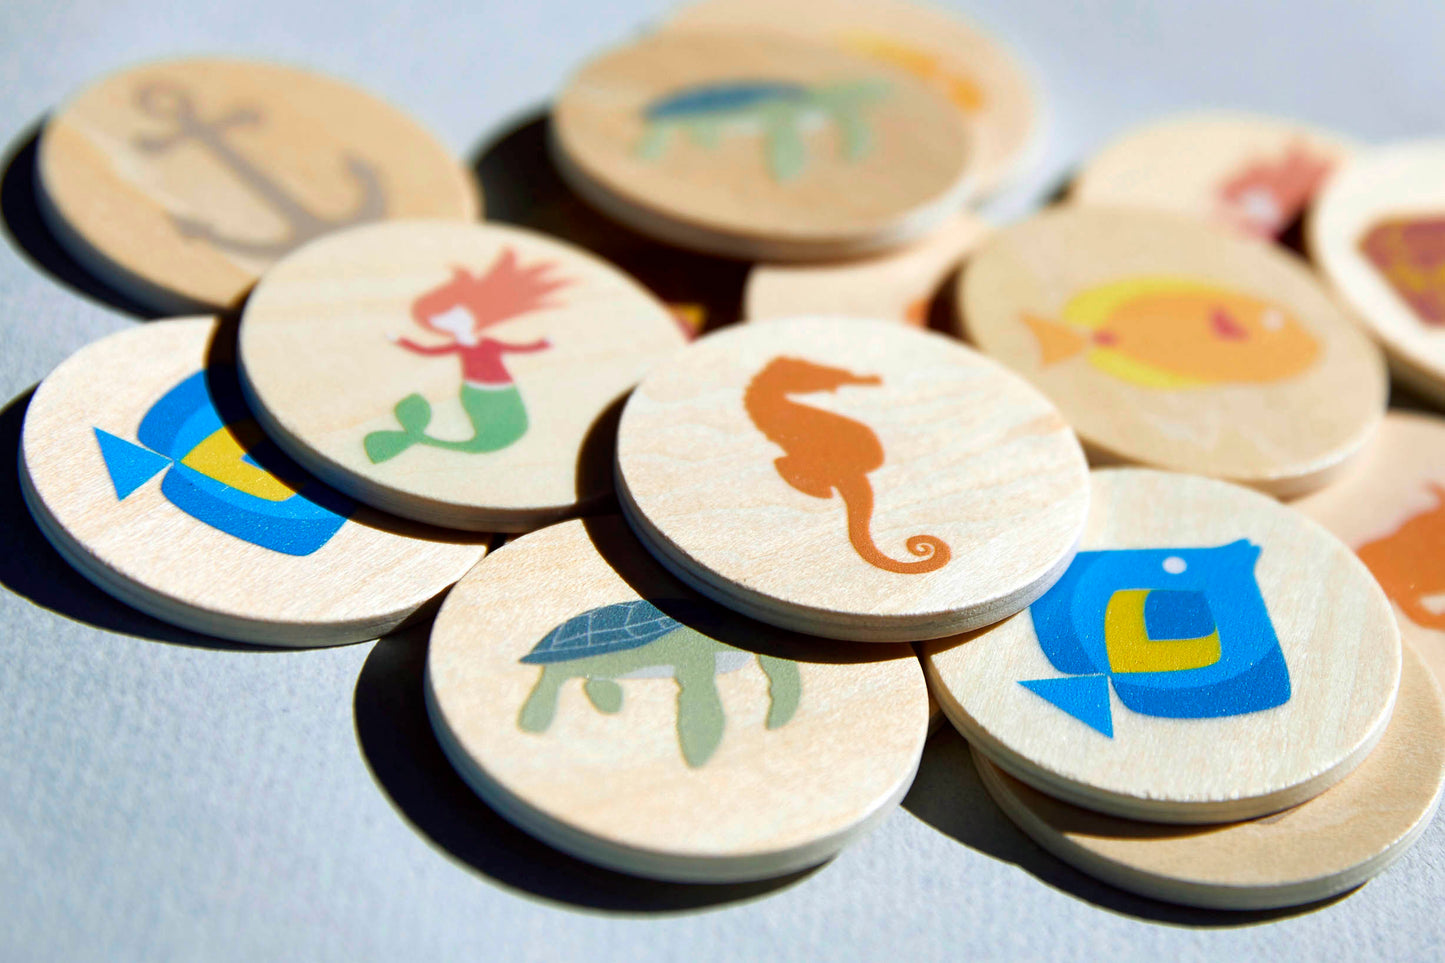 16 (8 pairs) beautifully designed wooden memory game discs made from sustainable wood (FSC timber) that comes in a little white 100% cotton bag. Compatible with the Ocean playmat and the Ocean lover suitcase. 